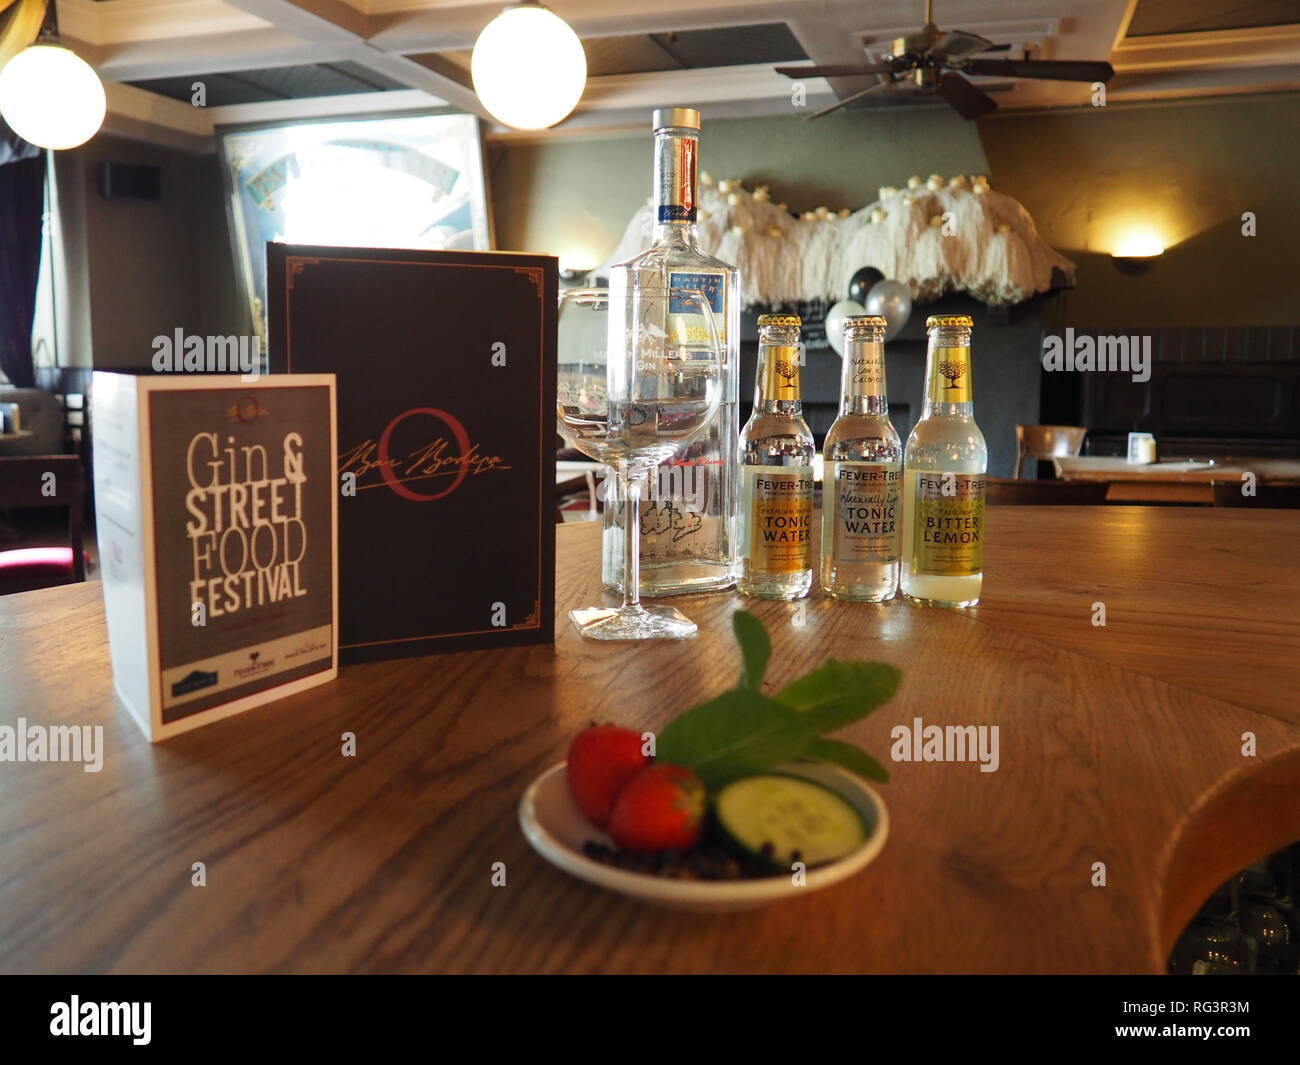 Gin & street festival table talker for a pub in Watford with Martin Miller's gin and fevertree tonics - Watford - Hertfordshire - UK Stock Photo